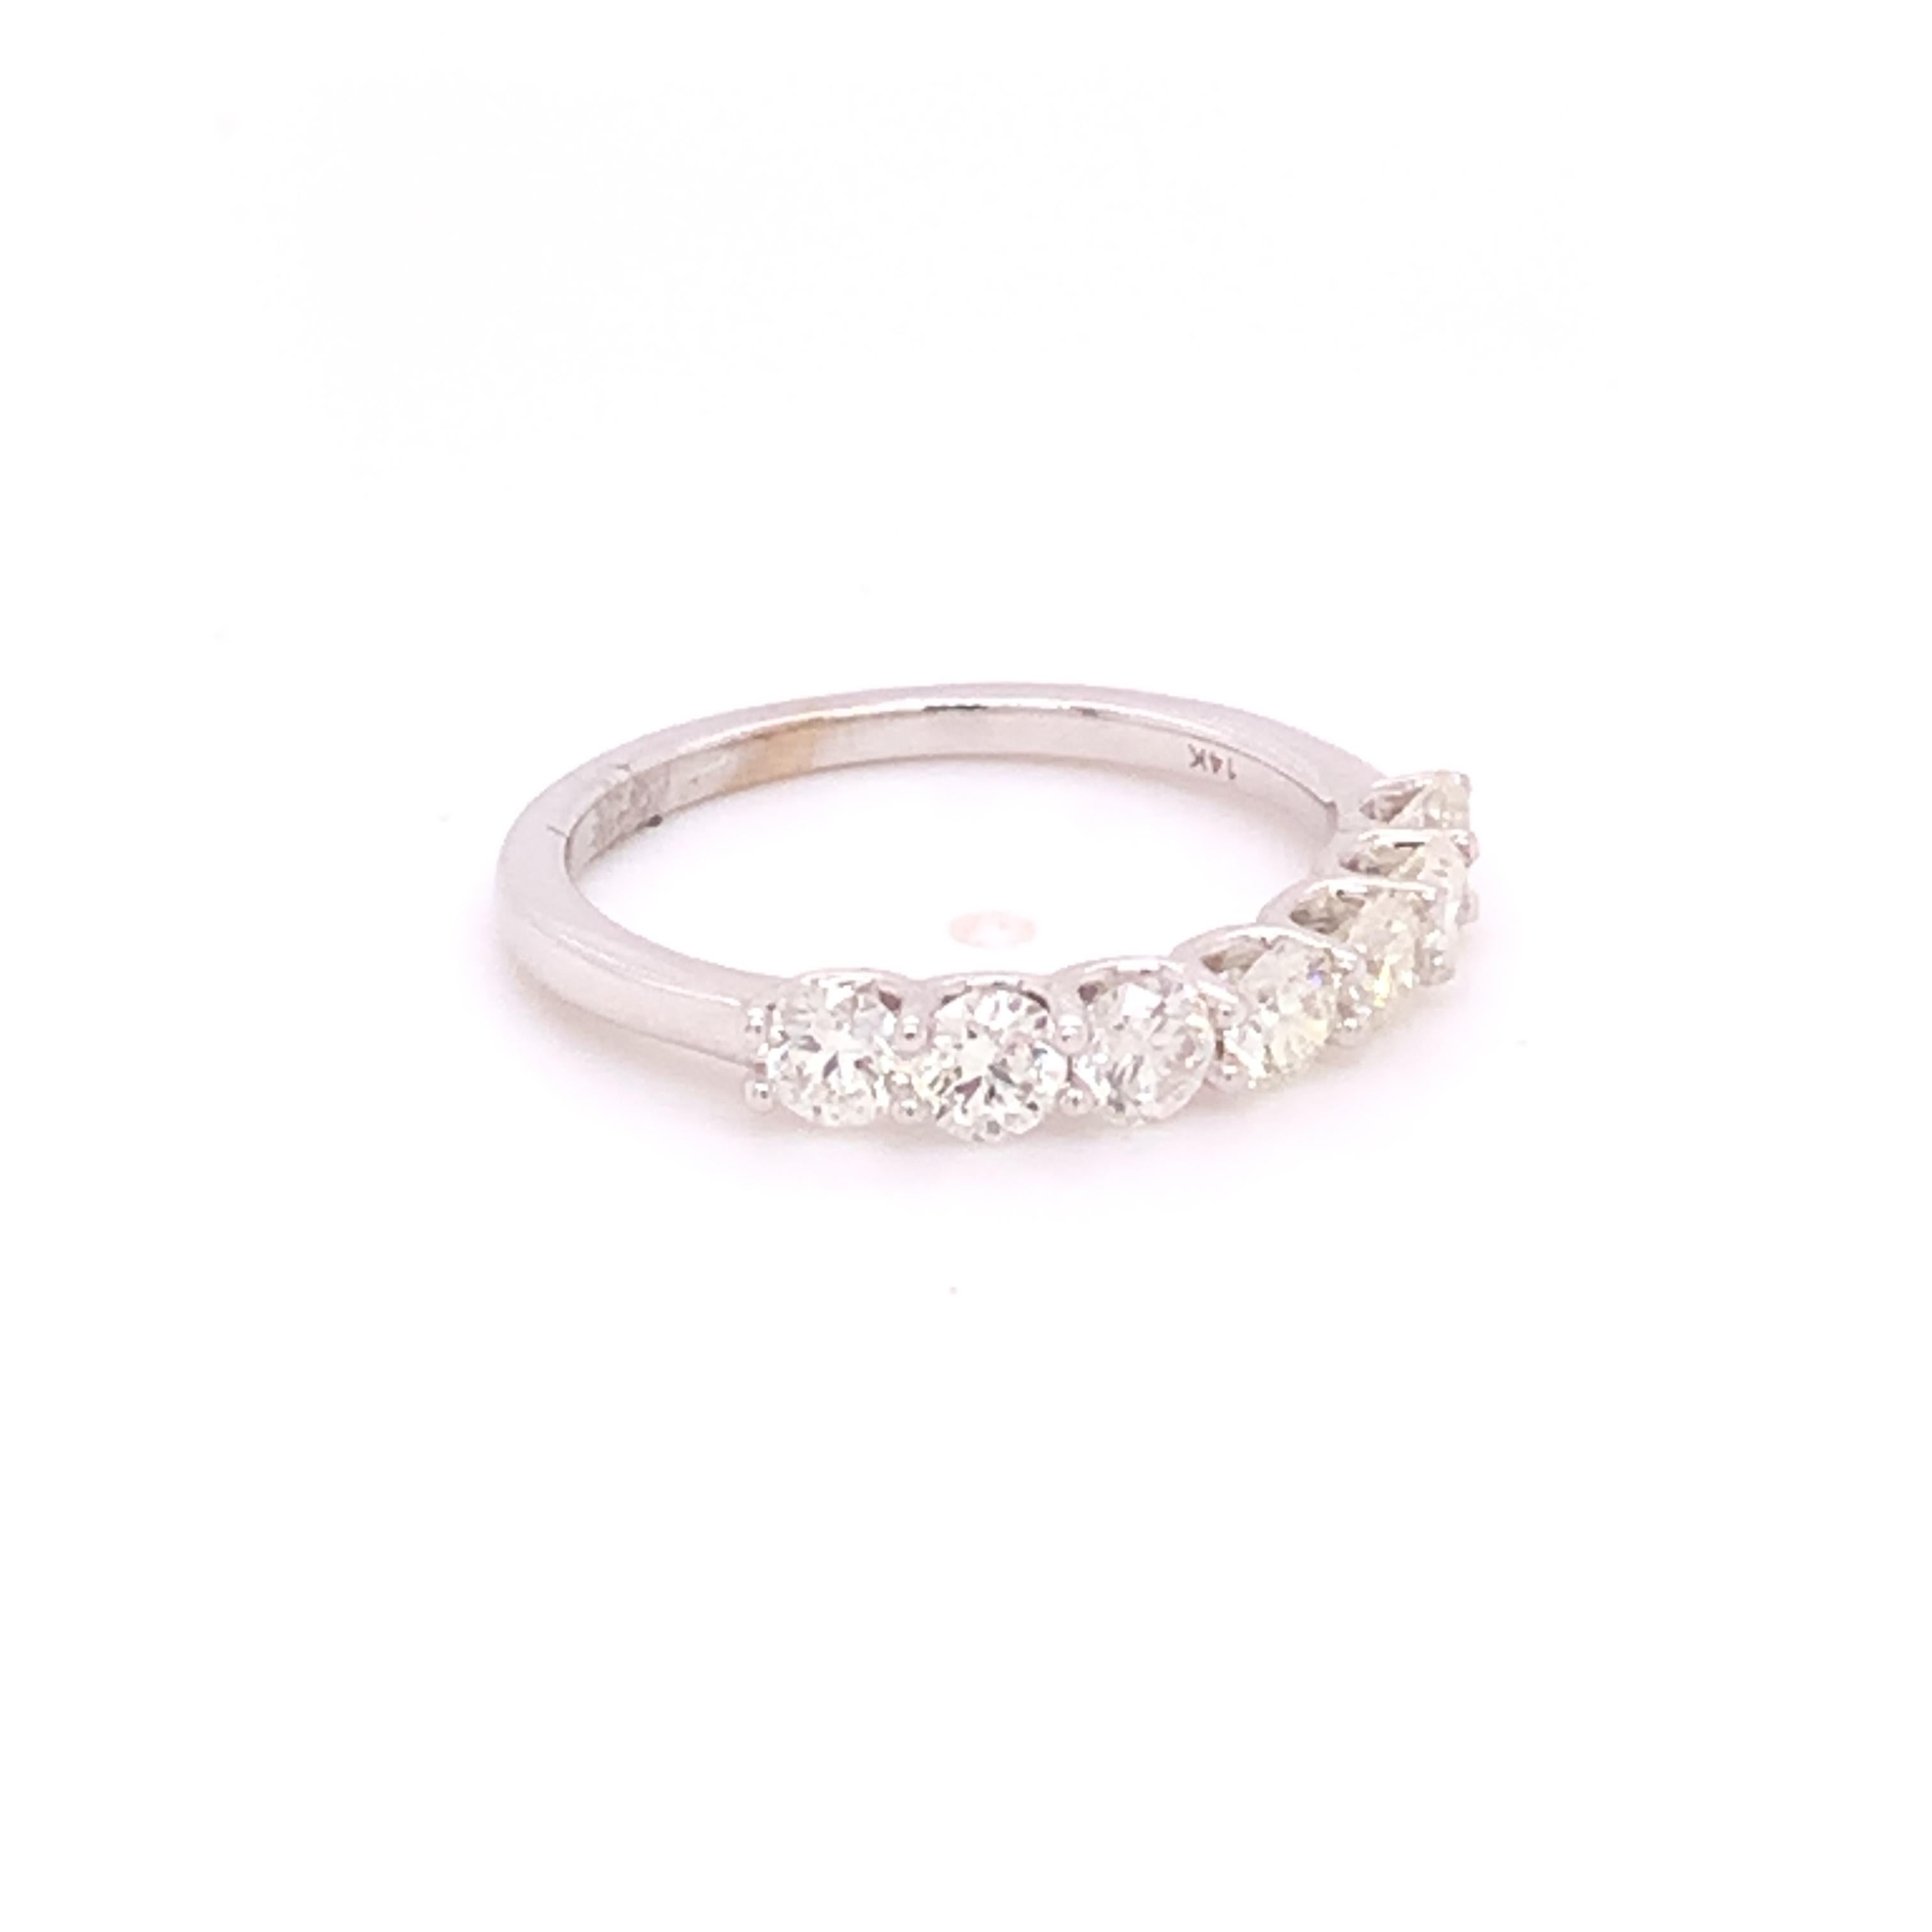 A beautiful timeless diamond band crafted in 14k white gold showcasing a total of 7 prong set round brilliant diamonds - 1 carat total weight. This luxurious band will sparkle in any light from every angle! This band can be matched with any type of